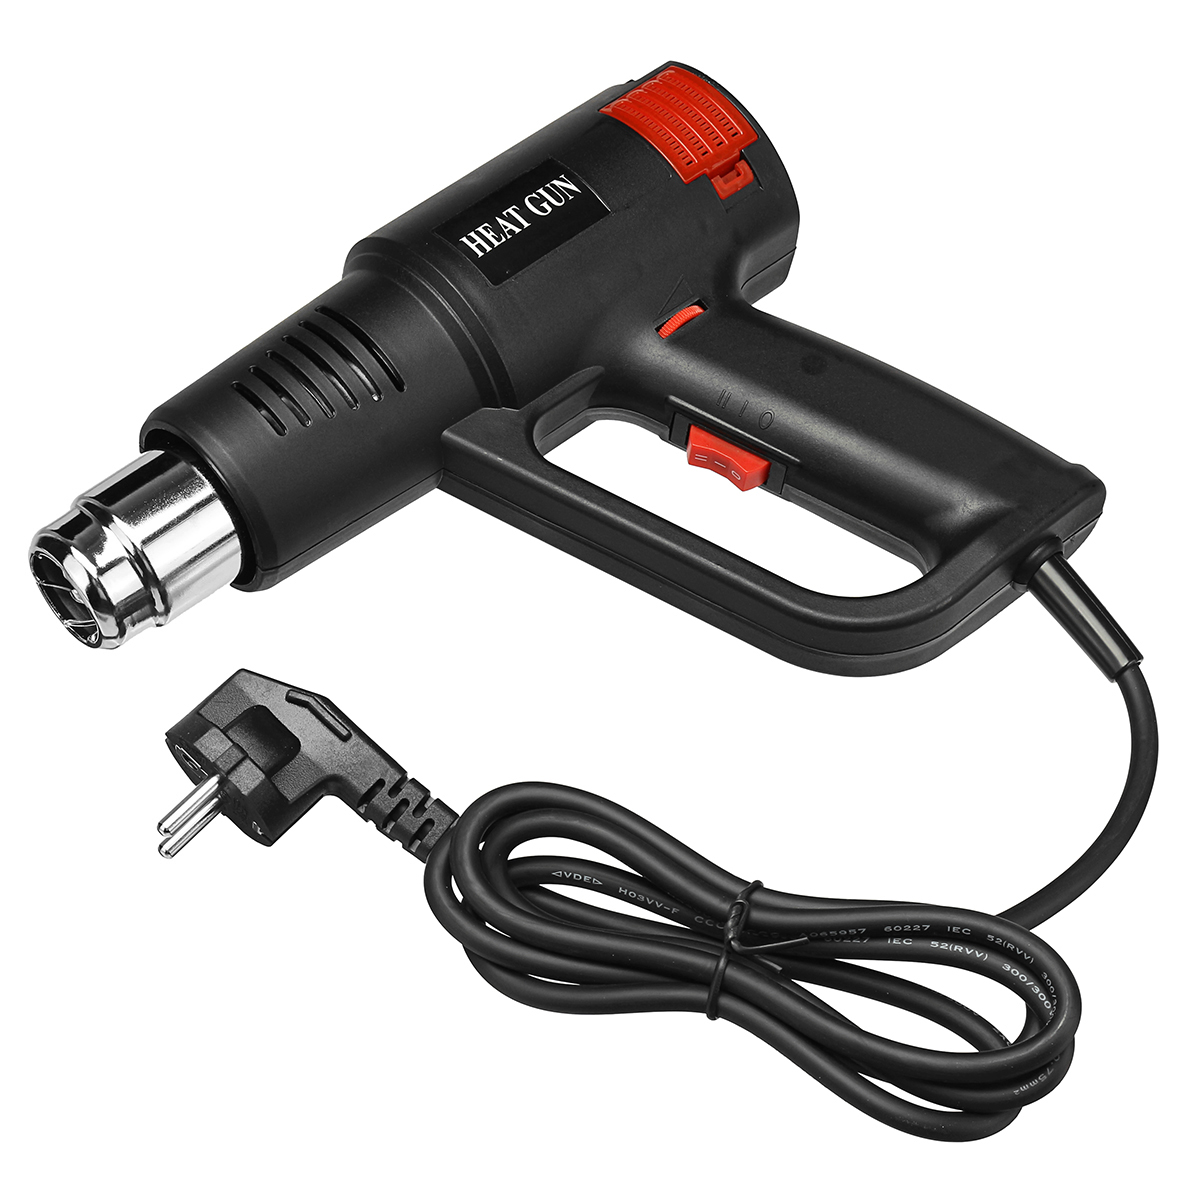 2000W-60-600-Profession-Electric-Heat-Guns-2-Speed-Heat-Variable-Hot-Air-Power-Tool-Hair-Dryer-for-S-1912957-7